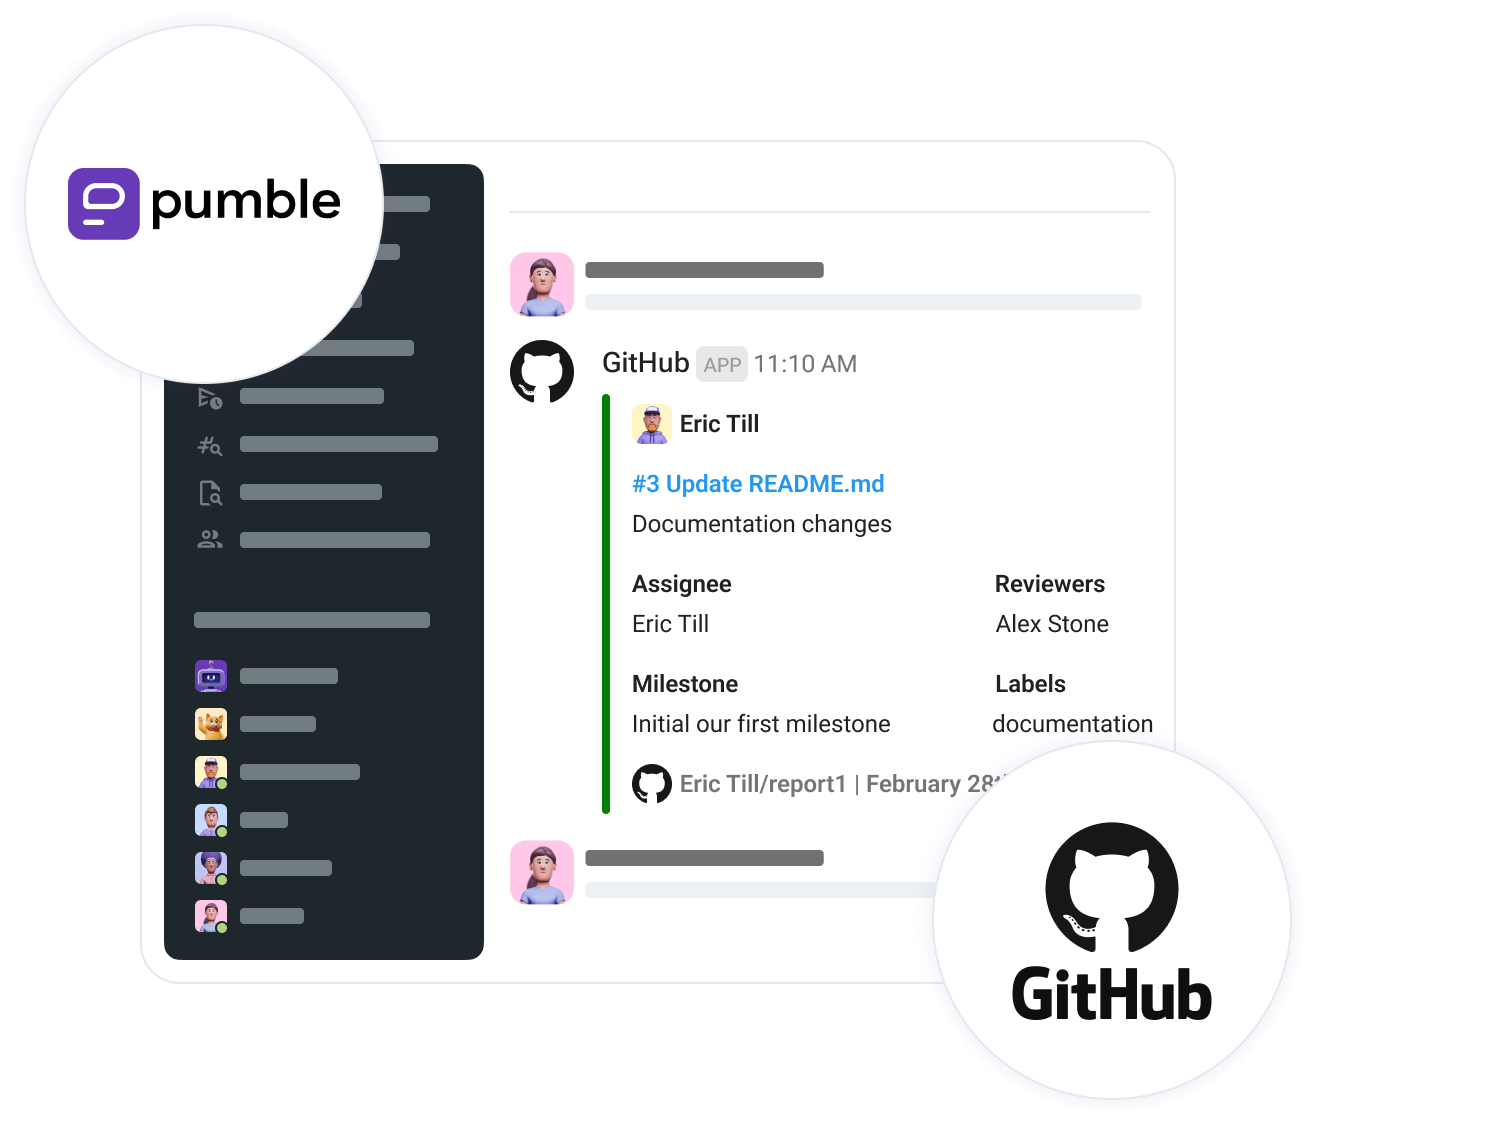 Image of how GitHub works in Pumble